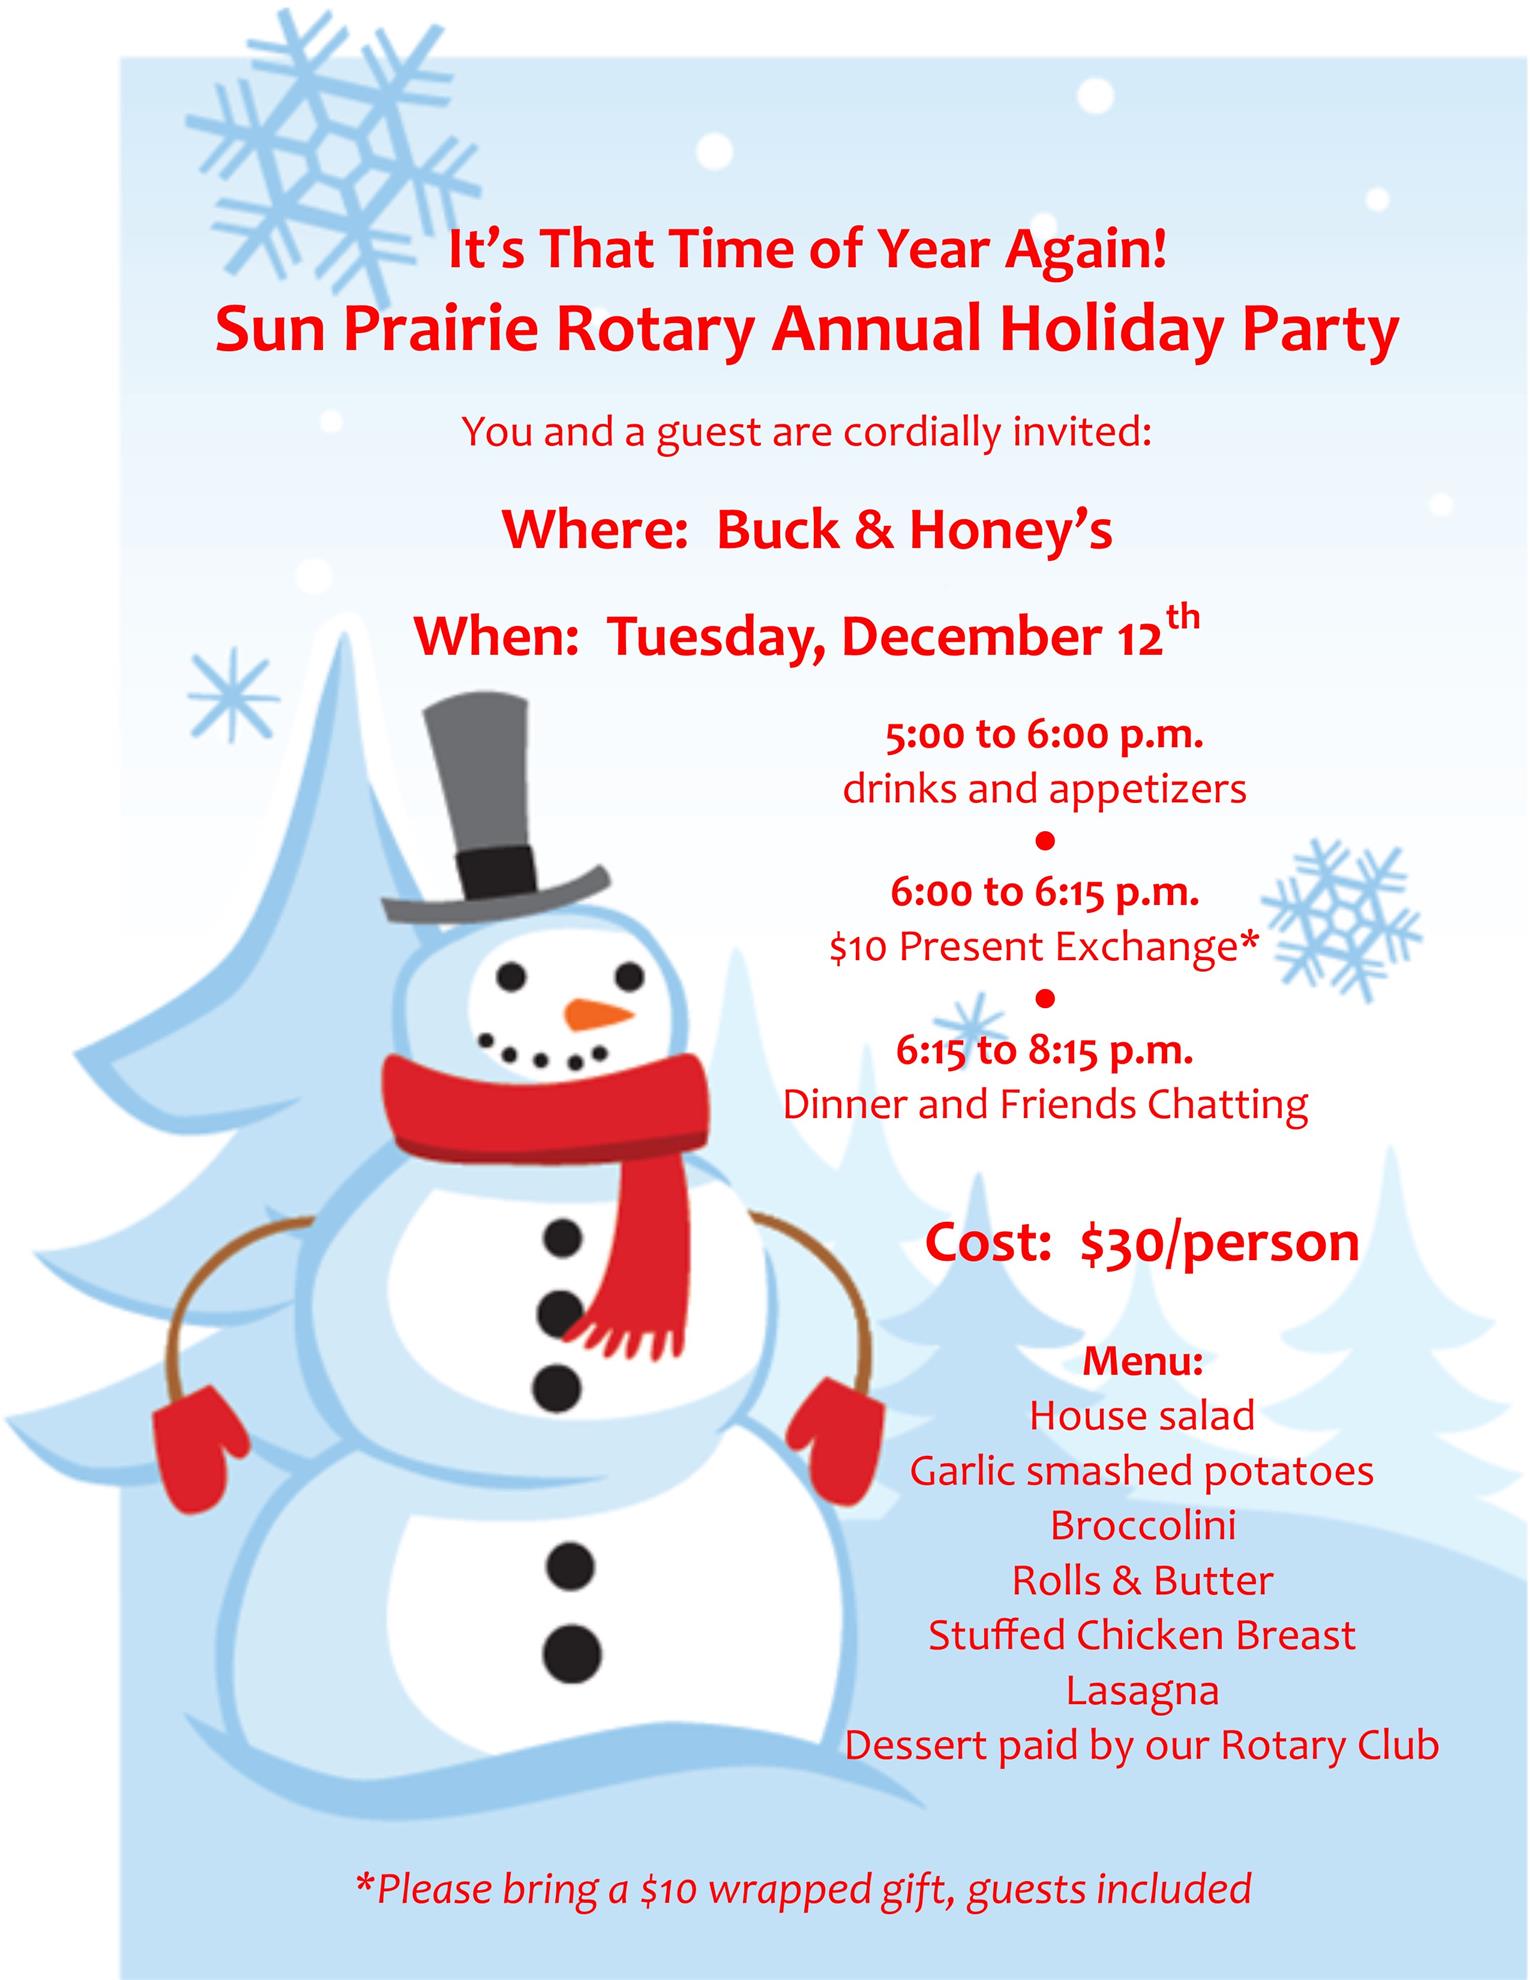 Holiday Party 2017 | Rotary Club of Sun Prairie